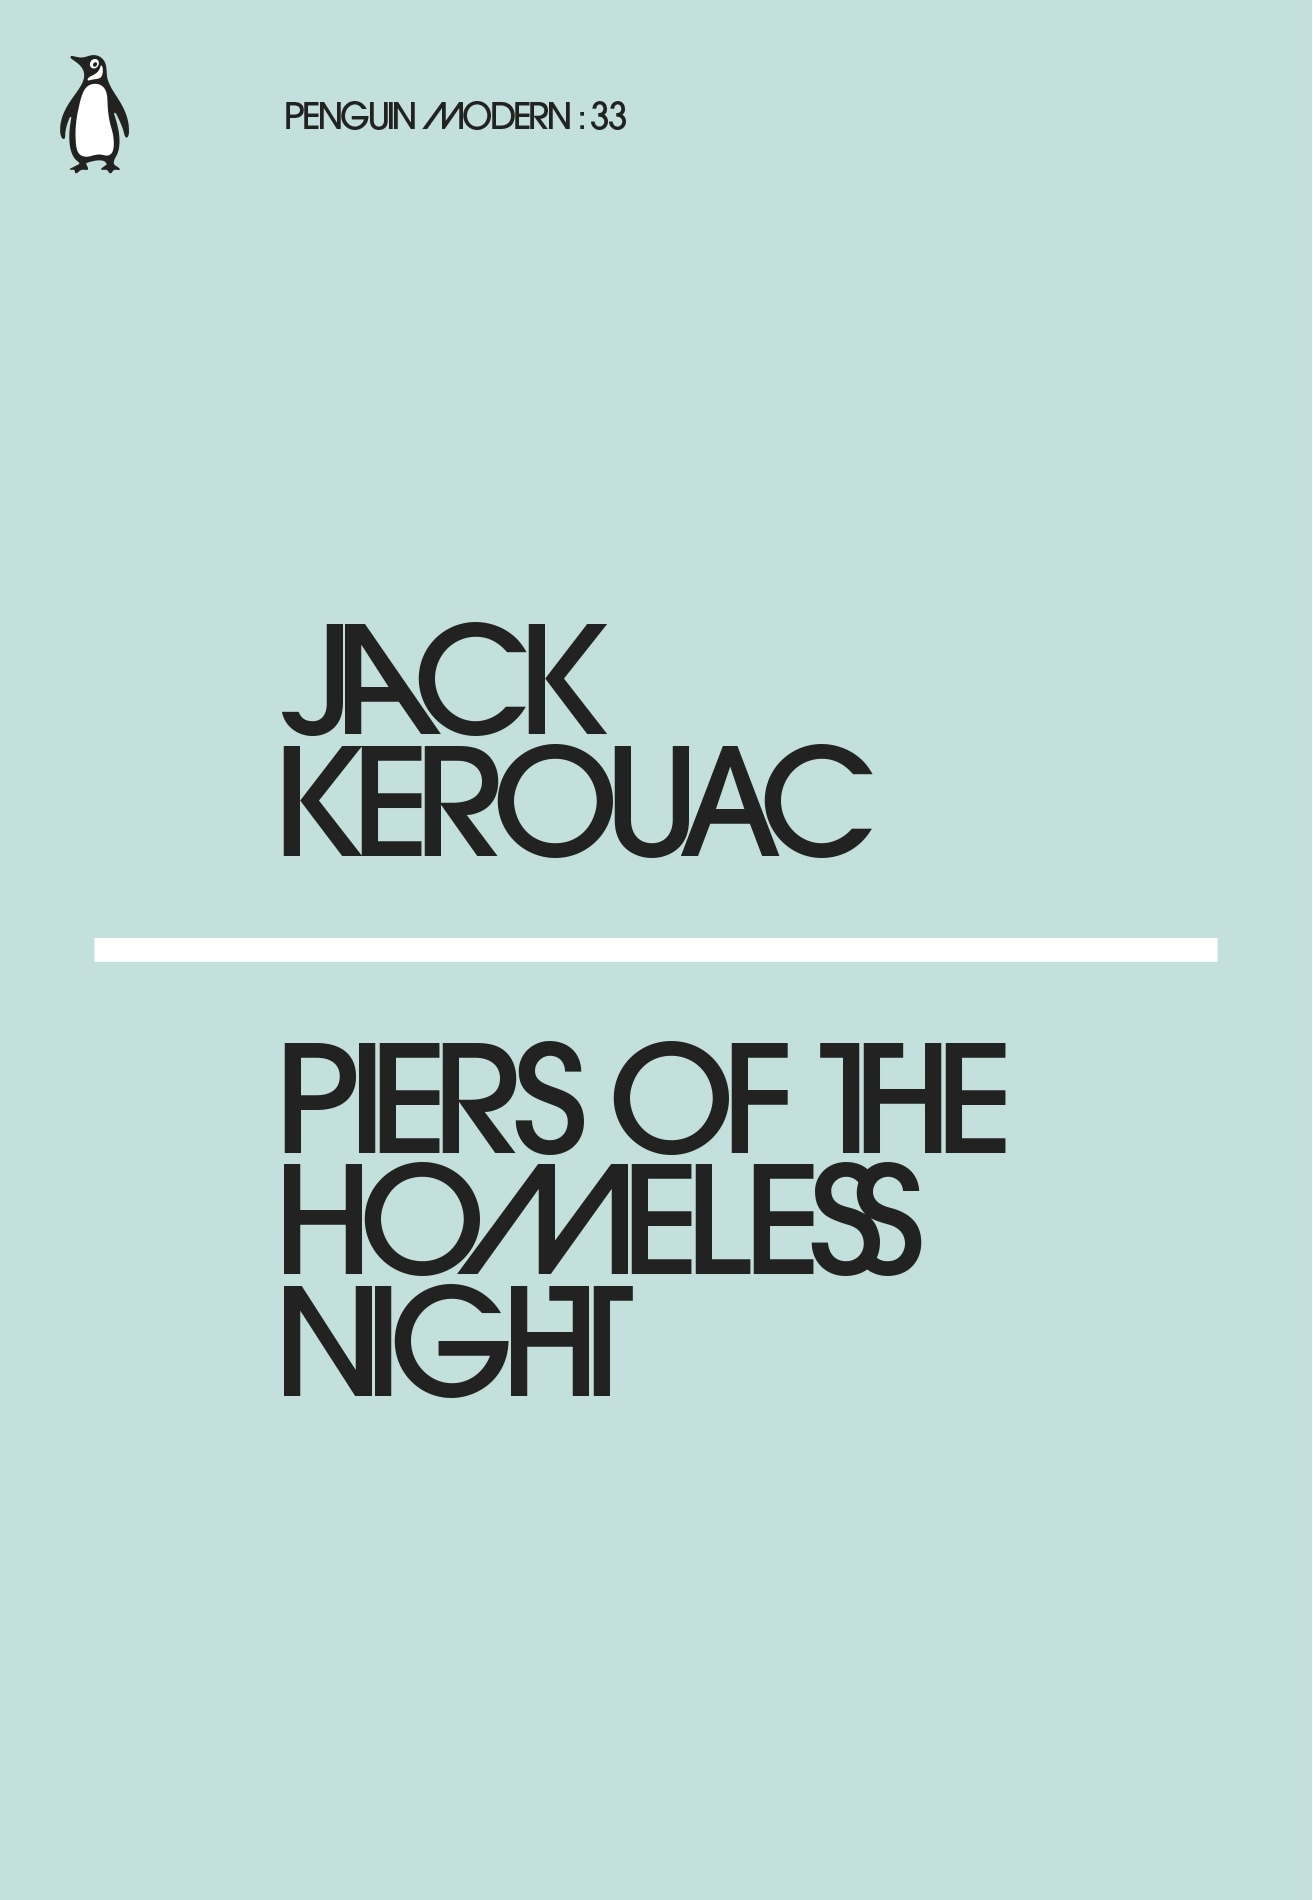 Book “Piers of the Homeless Night” by Jack Kerouac — February 22, 2018